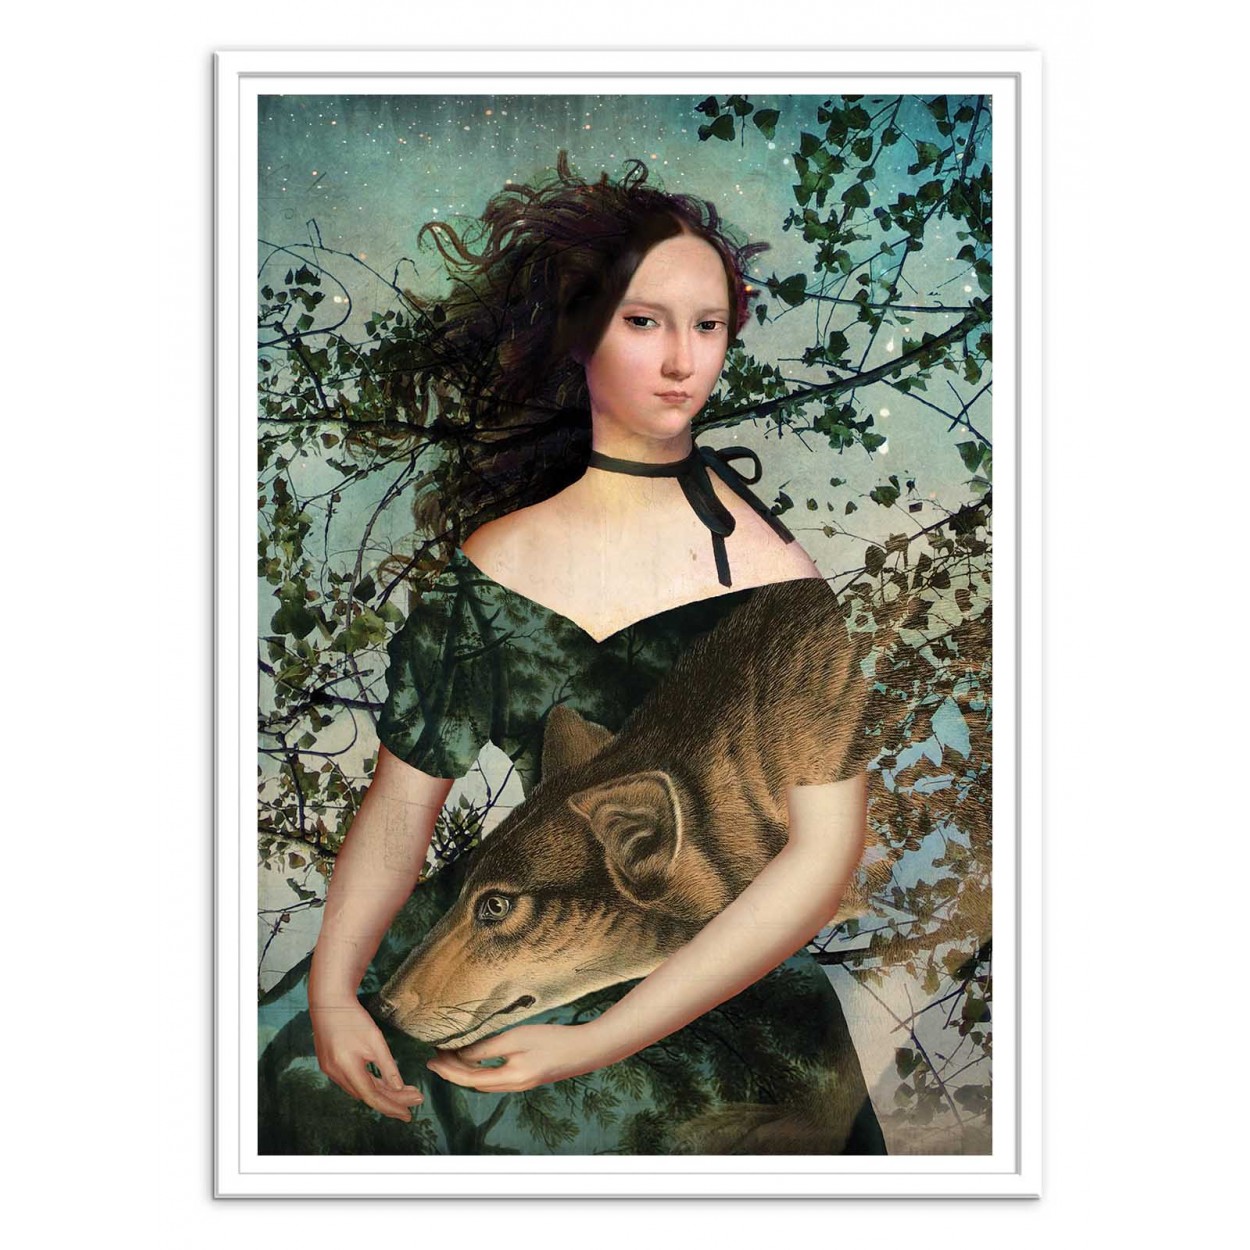 - by wolf, Catrin Surréalism Art-Poster with Portrait Welz-Stein a